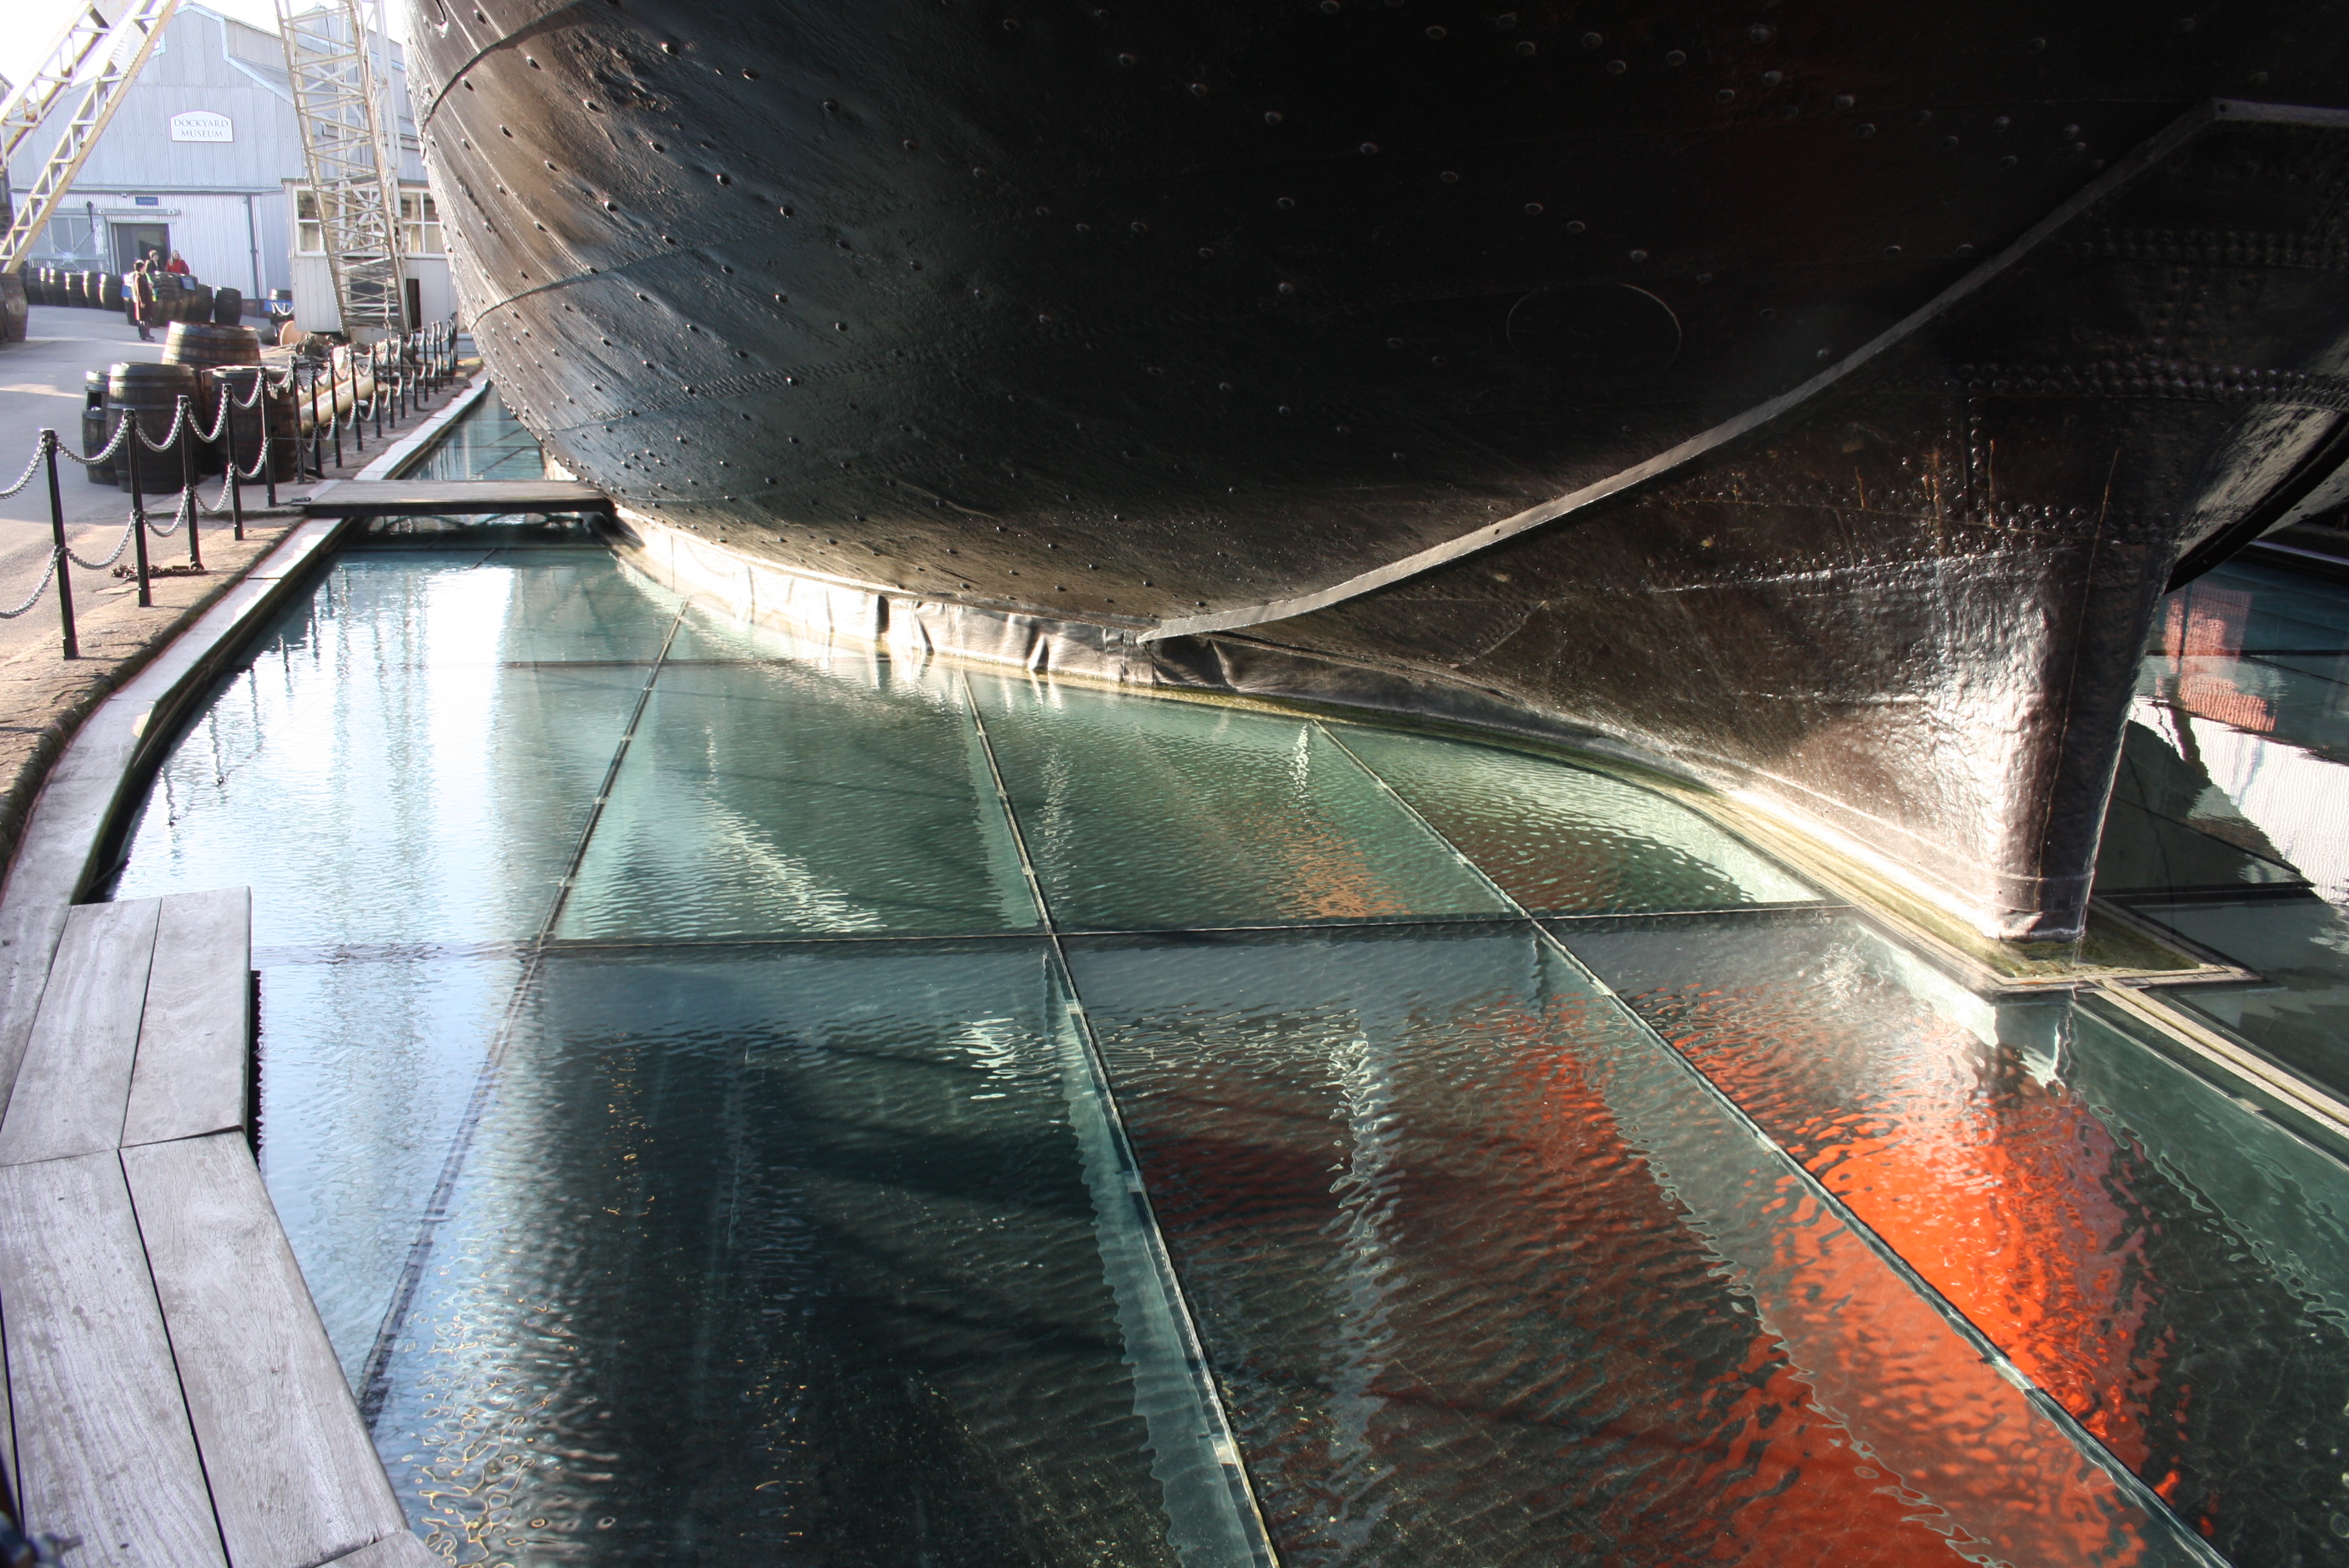 SS Great Britain, showing the 'false sea' that effectively seals the lower hull from the air. Photo taken on February 21, 2009.